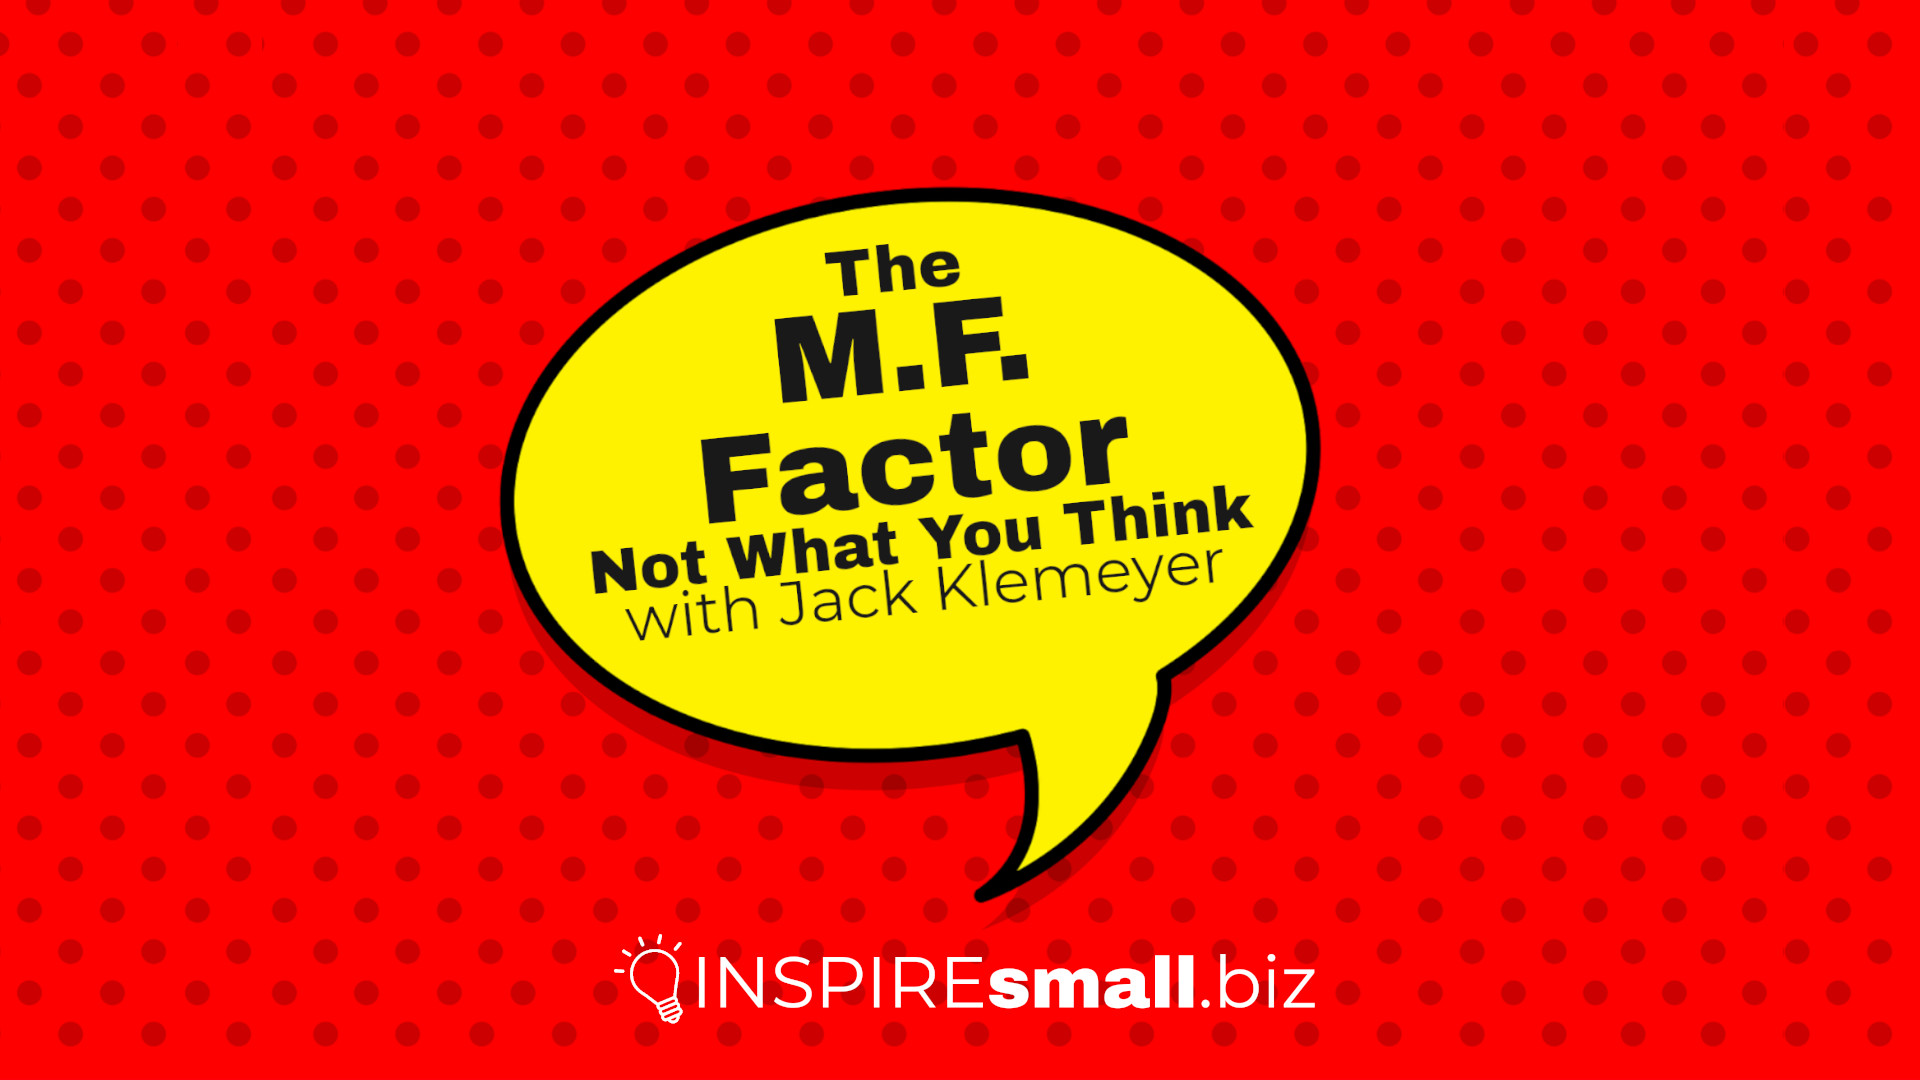 The MF Factor – Not What You Think